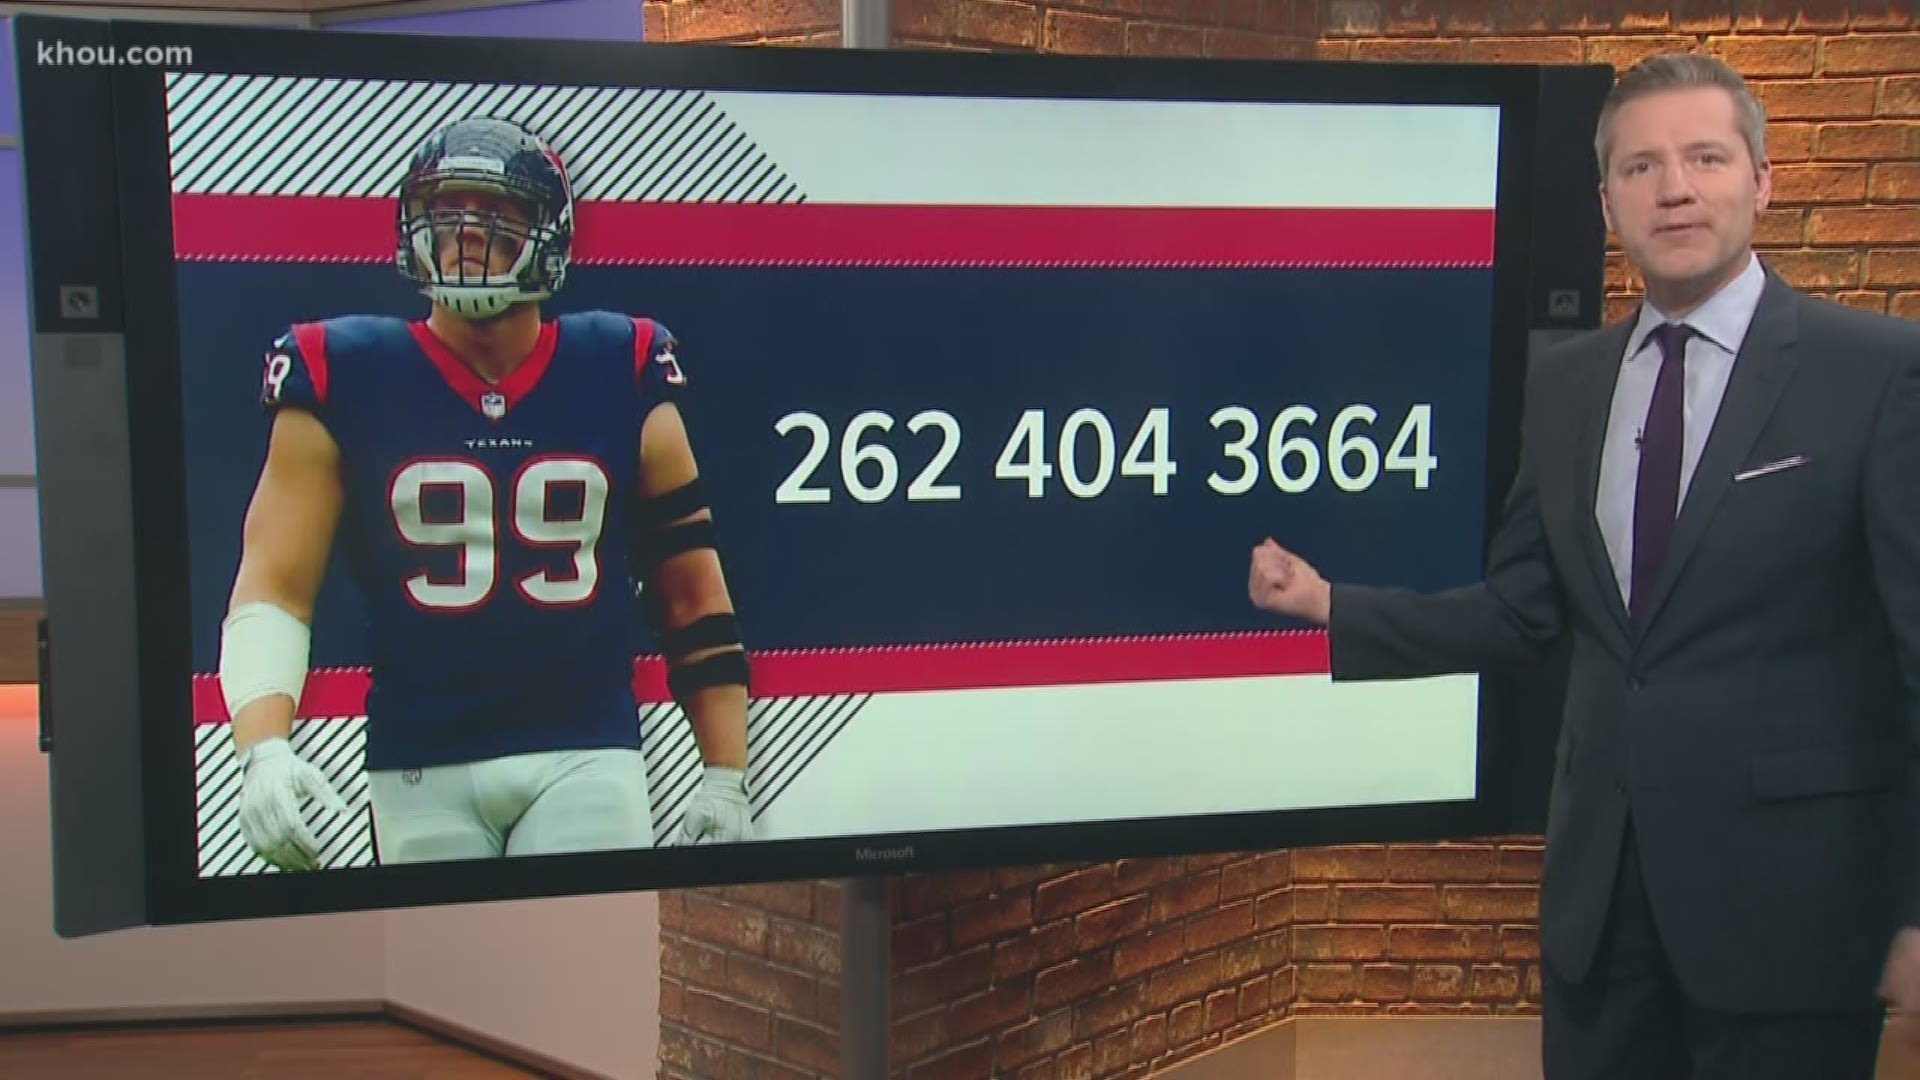 Have you ever wanted to tell J.J. Watt what you think about him?